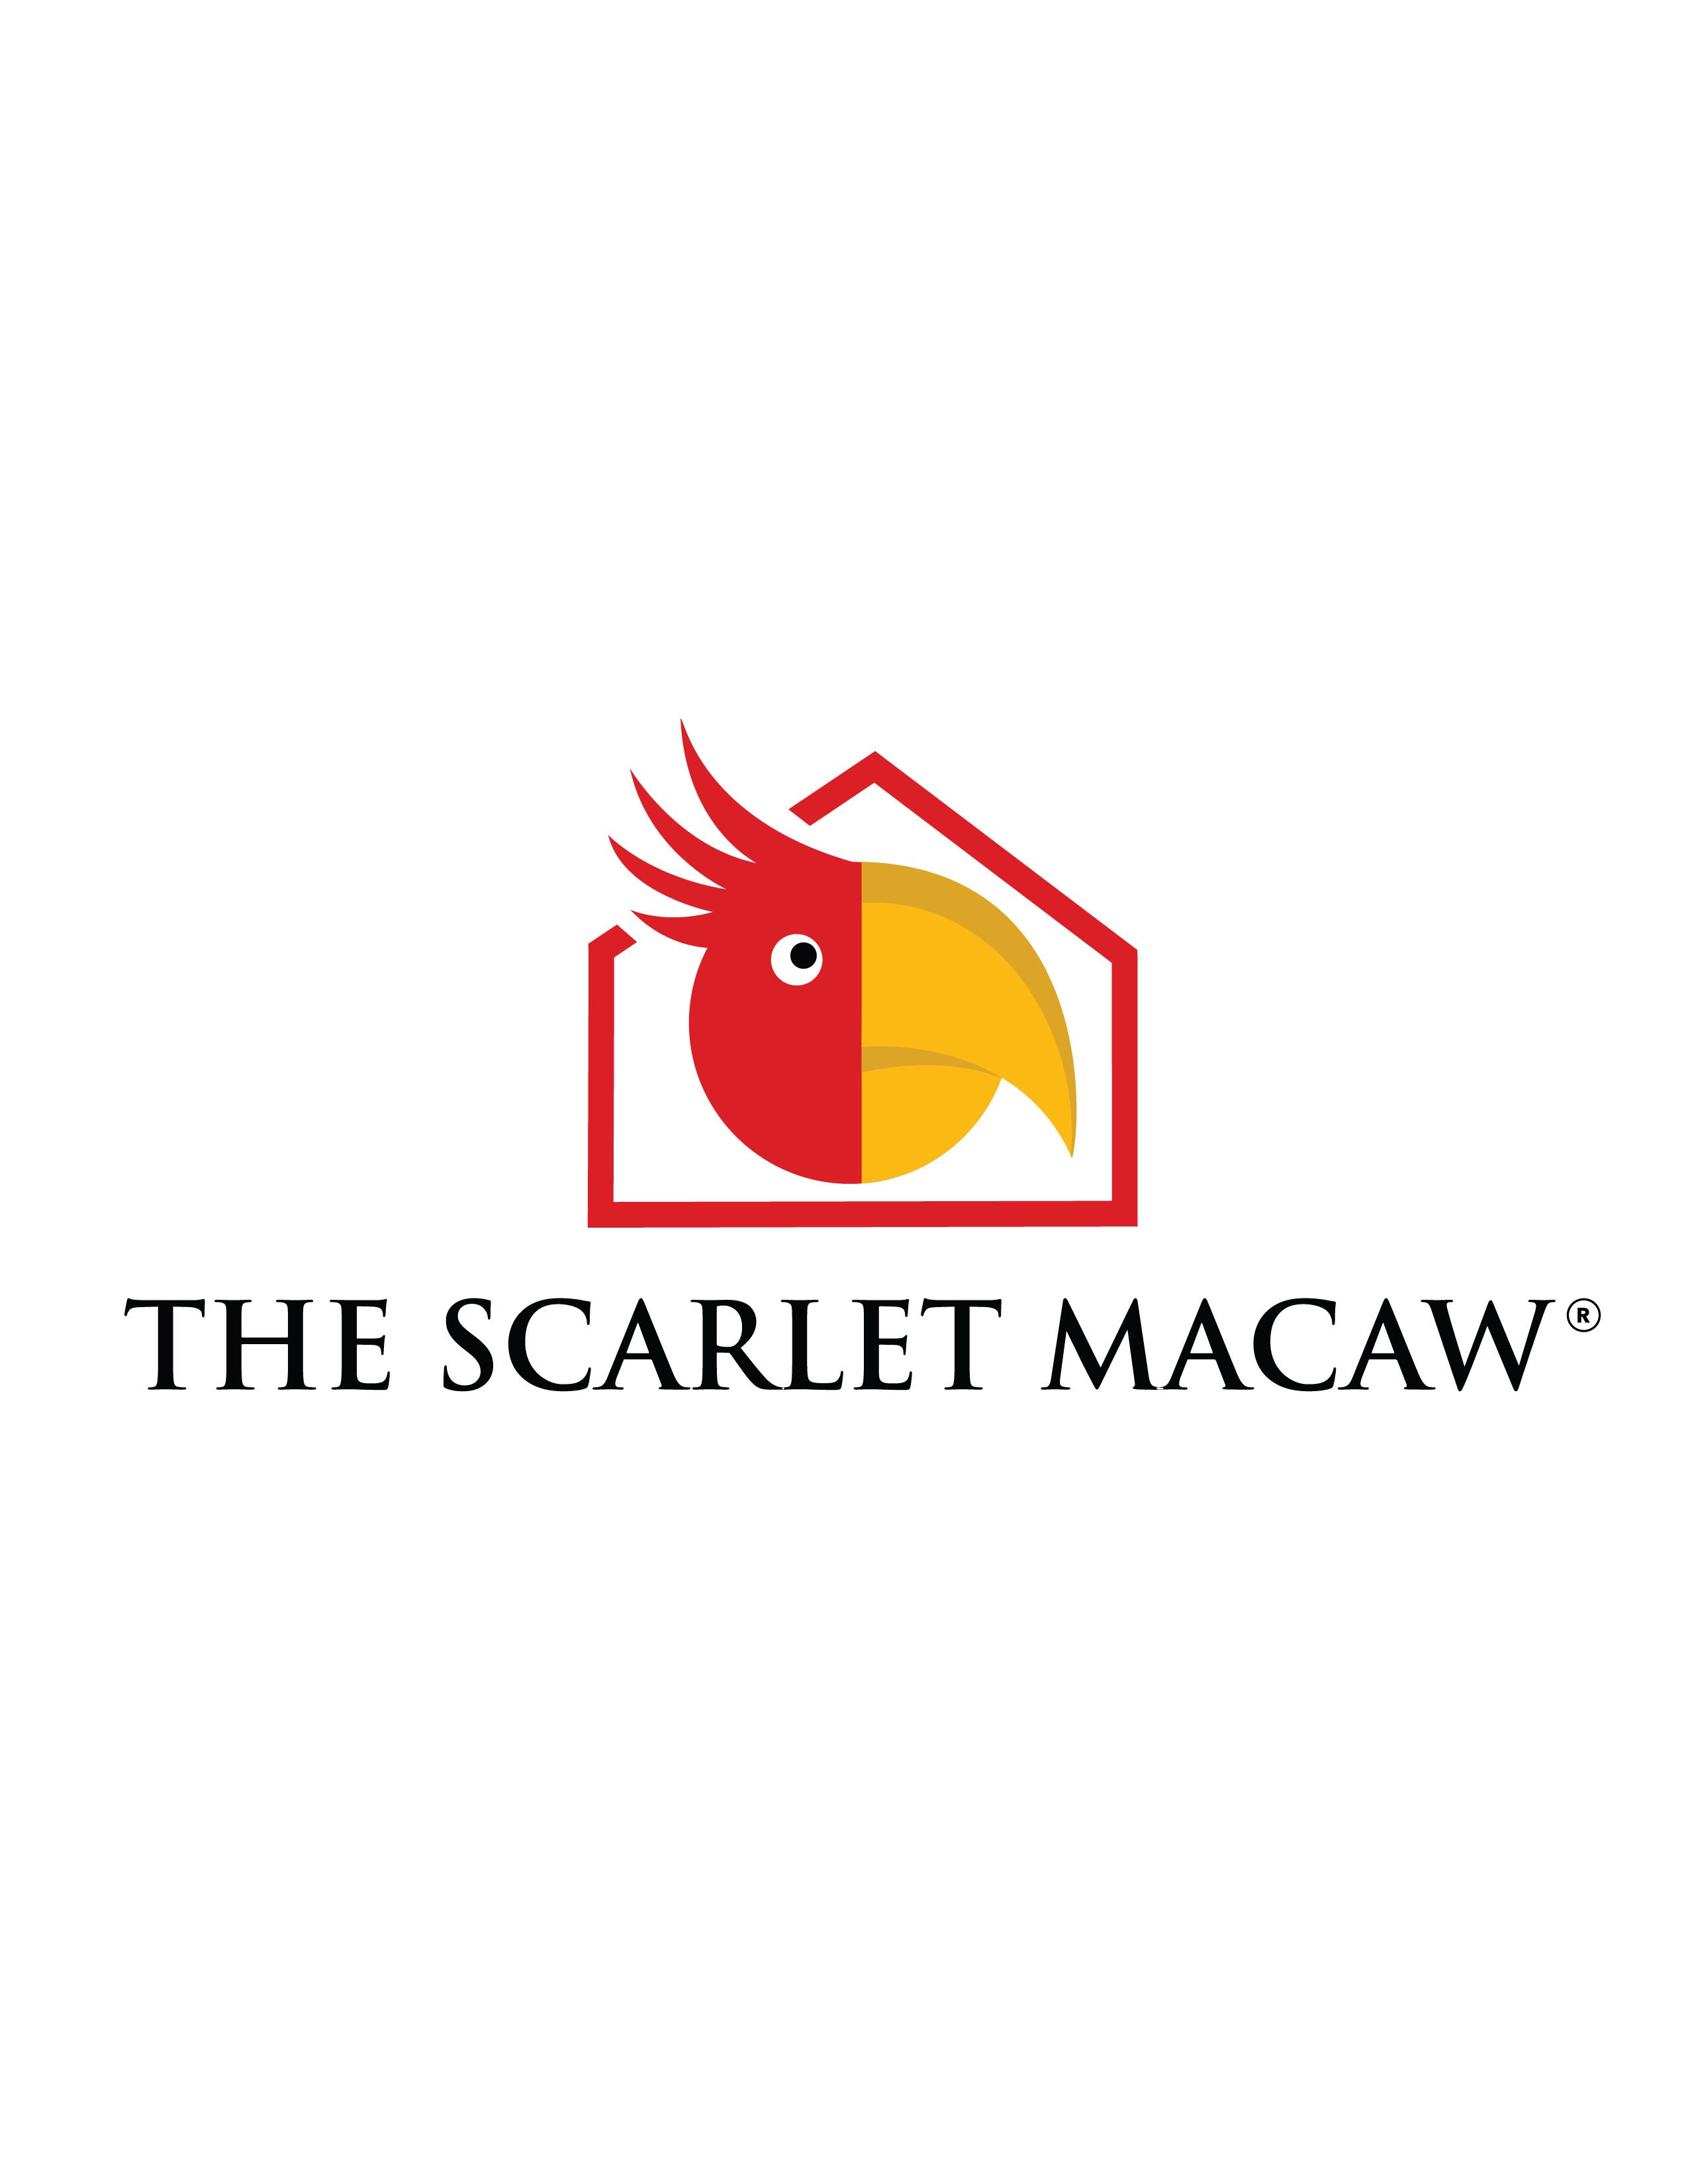 The Scarlet Macaw Foldup Chair Makes Enjoying the Outdoors More Convenient